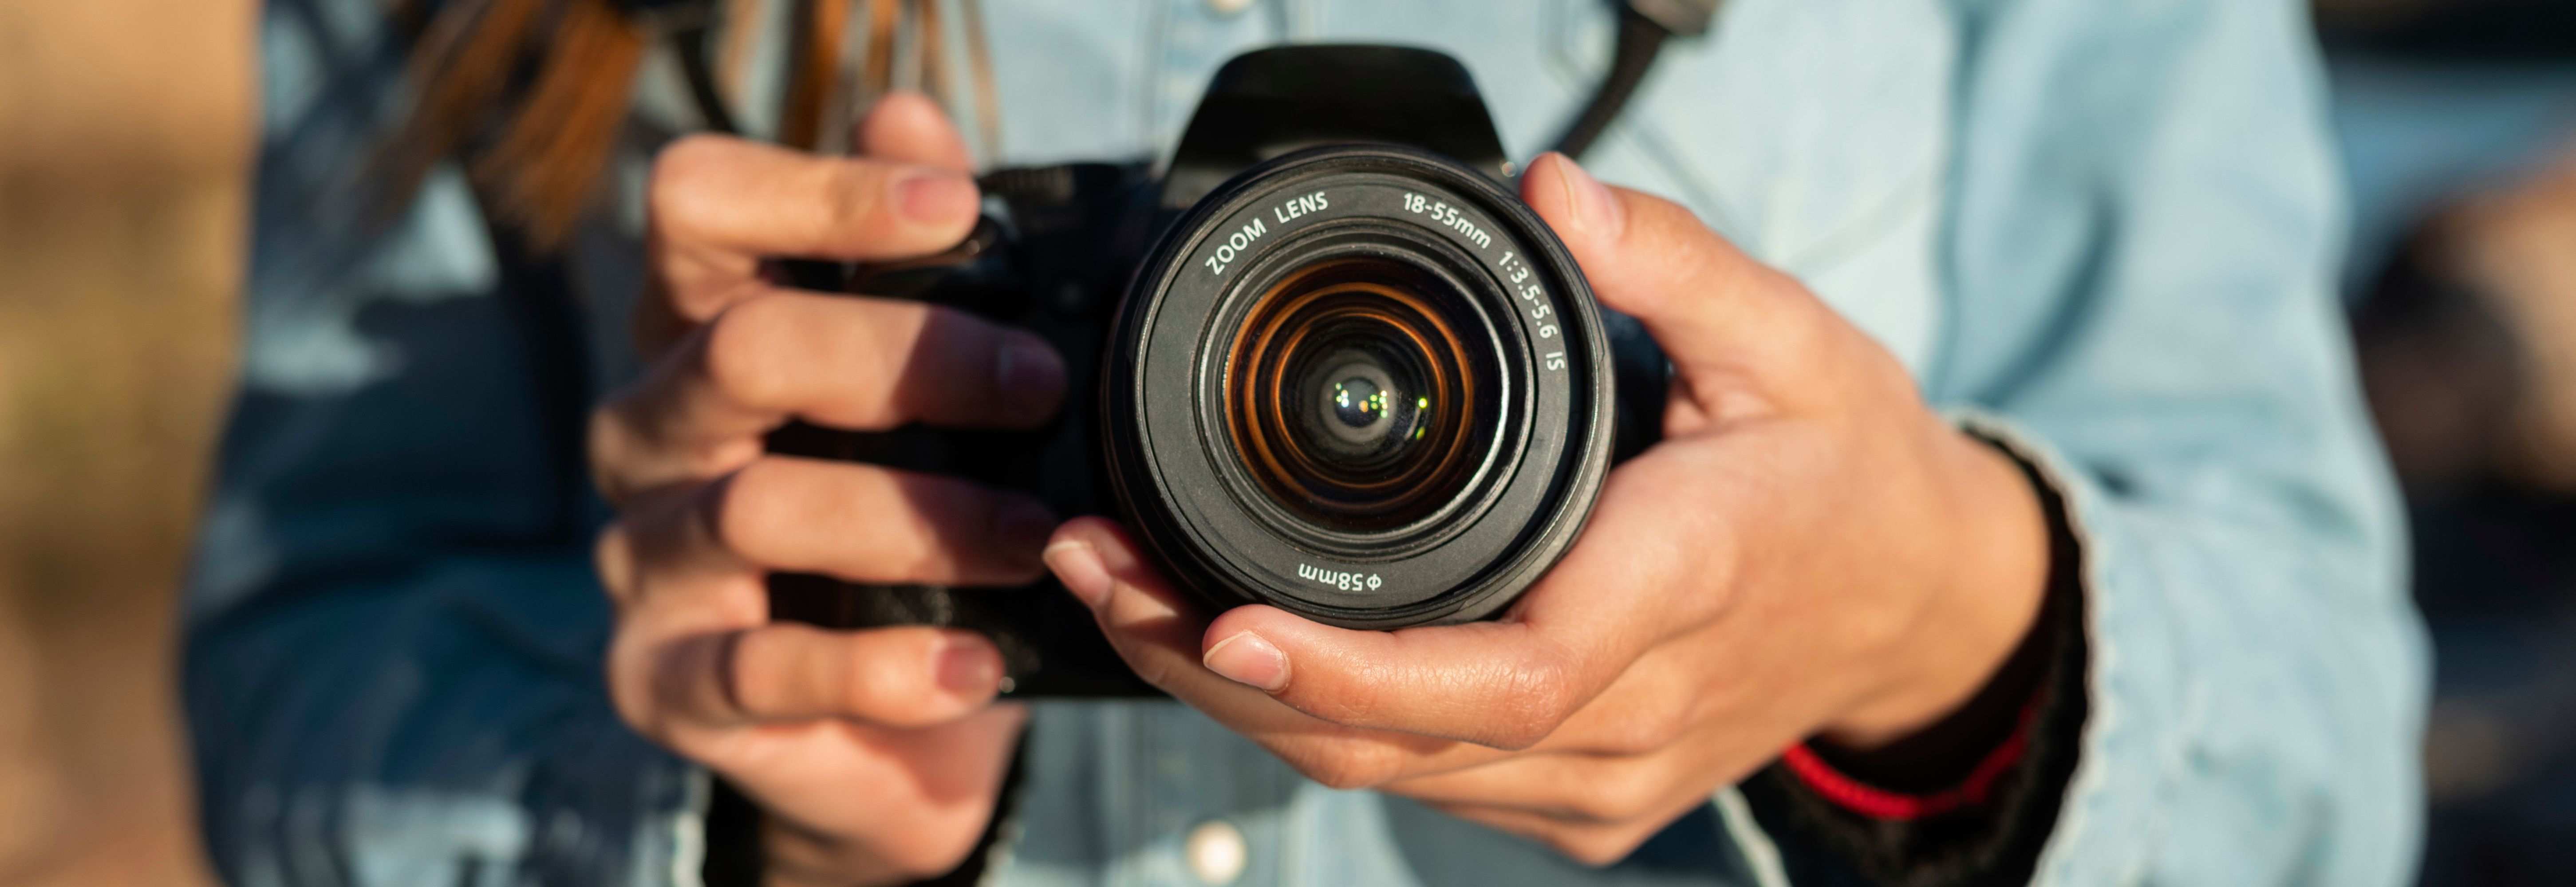 up close with a professional photographer's camera